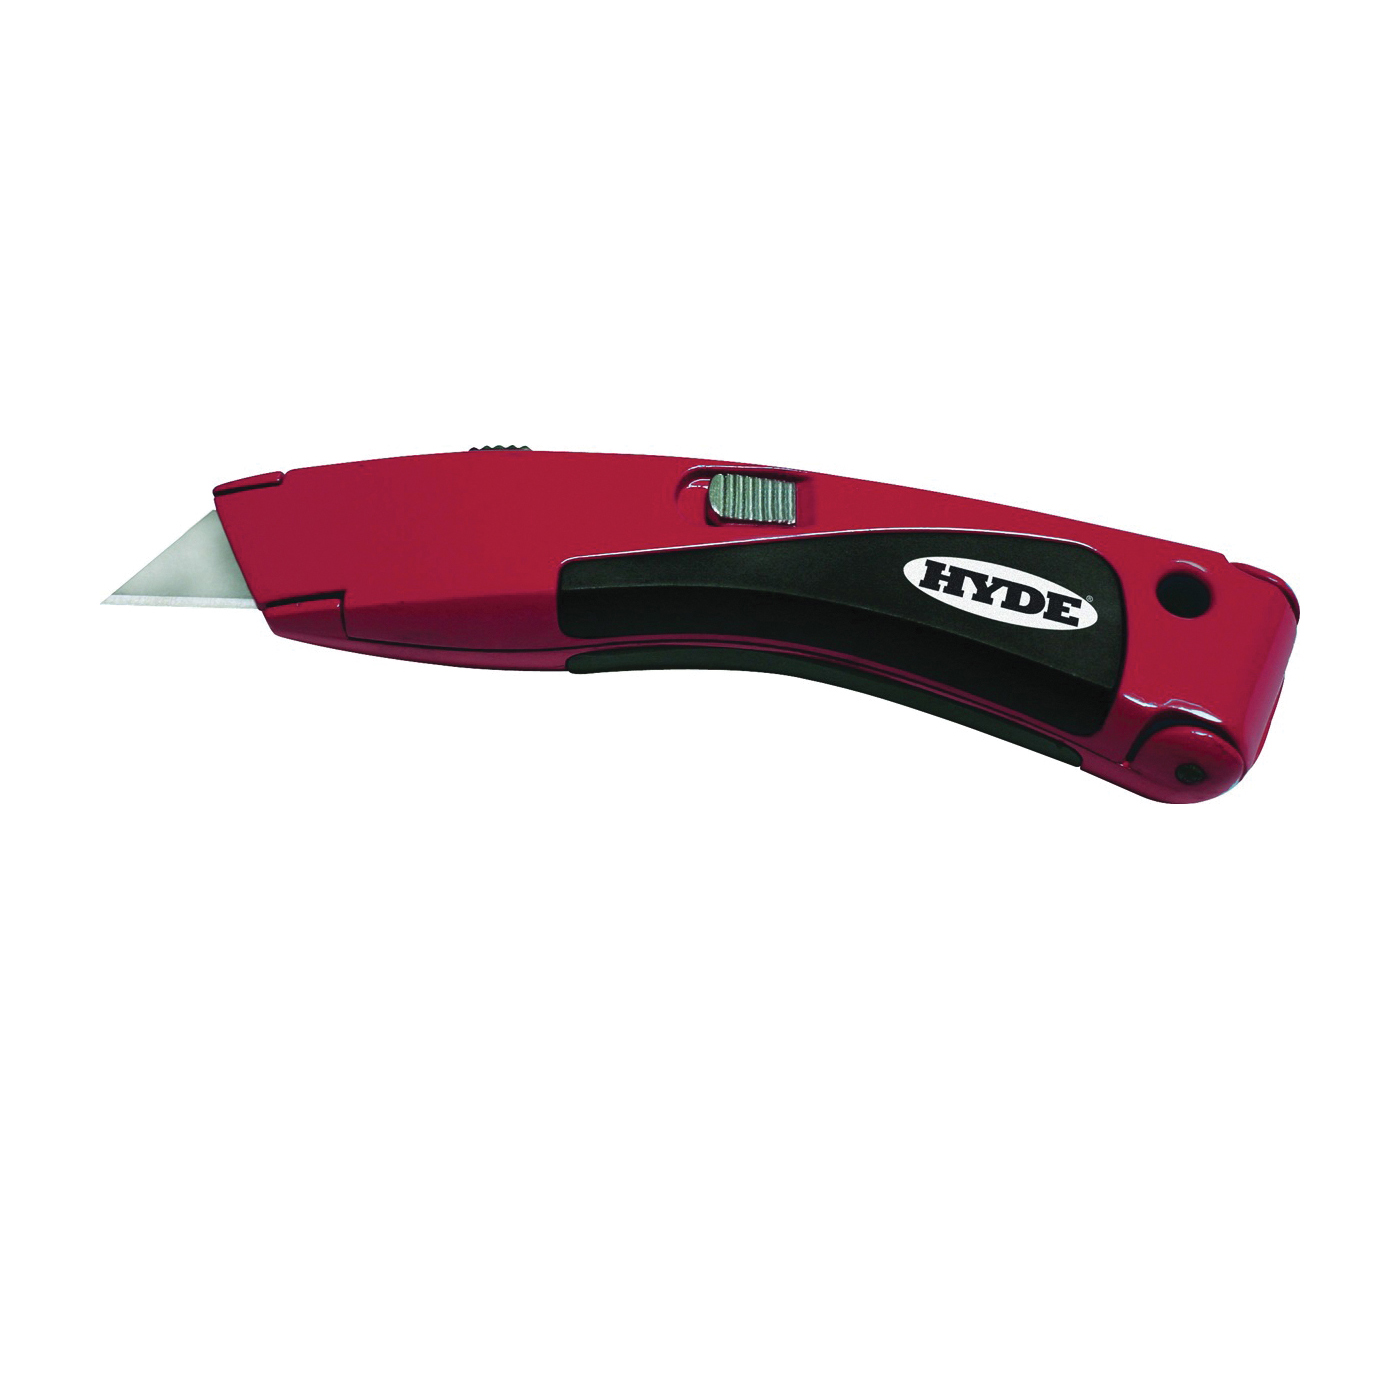 42081 Utility Knife, Carbon Steel Blade, Curved Handle, Red Handle